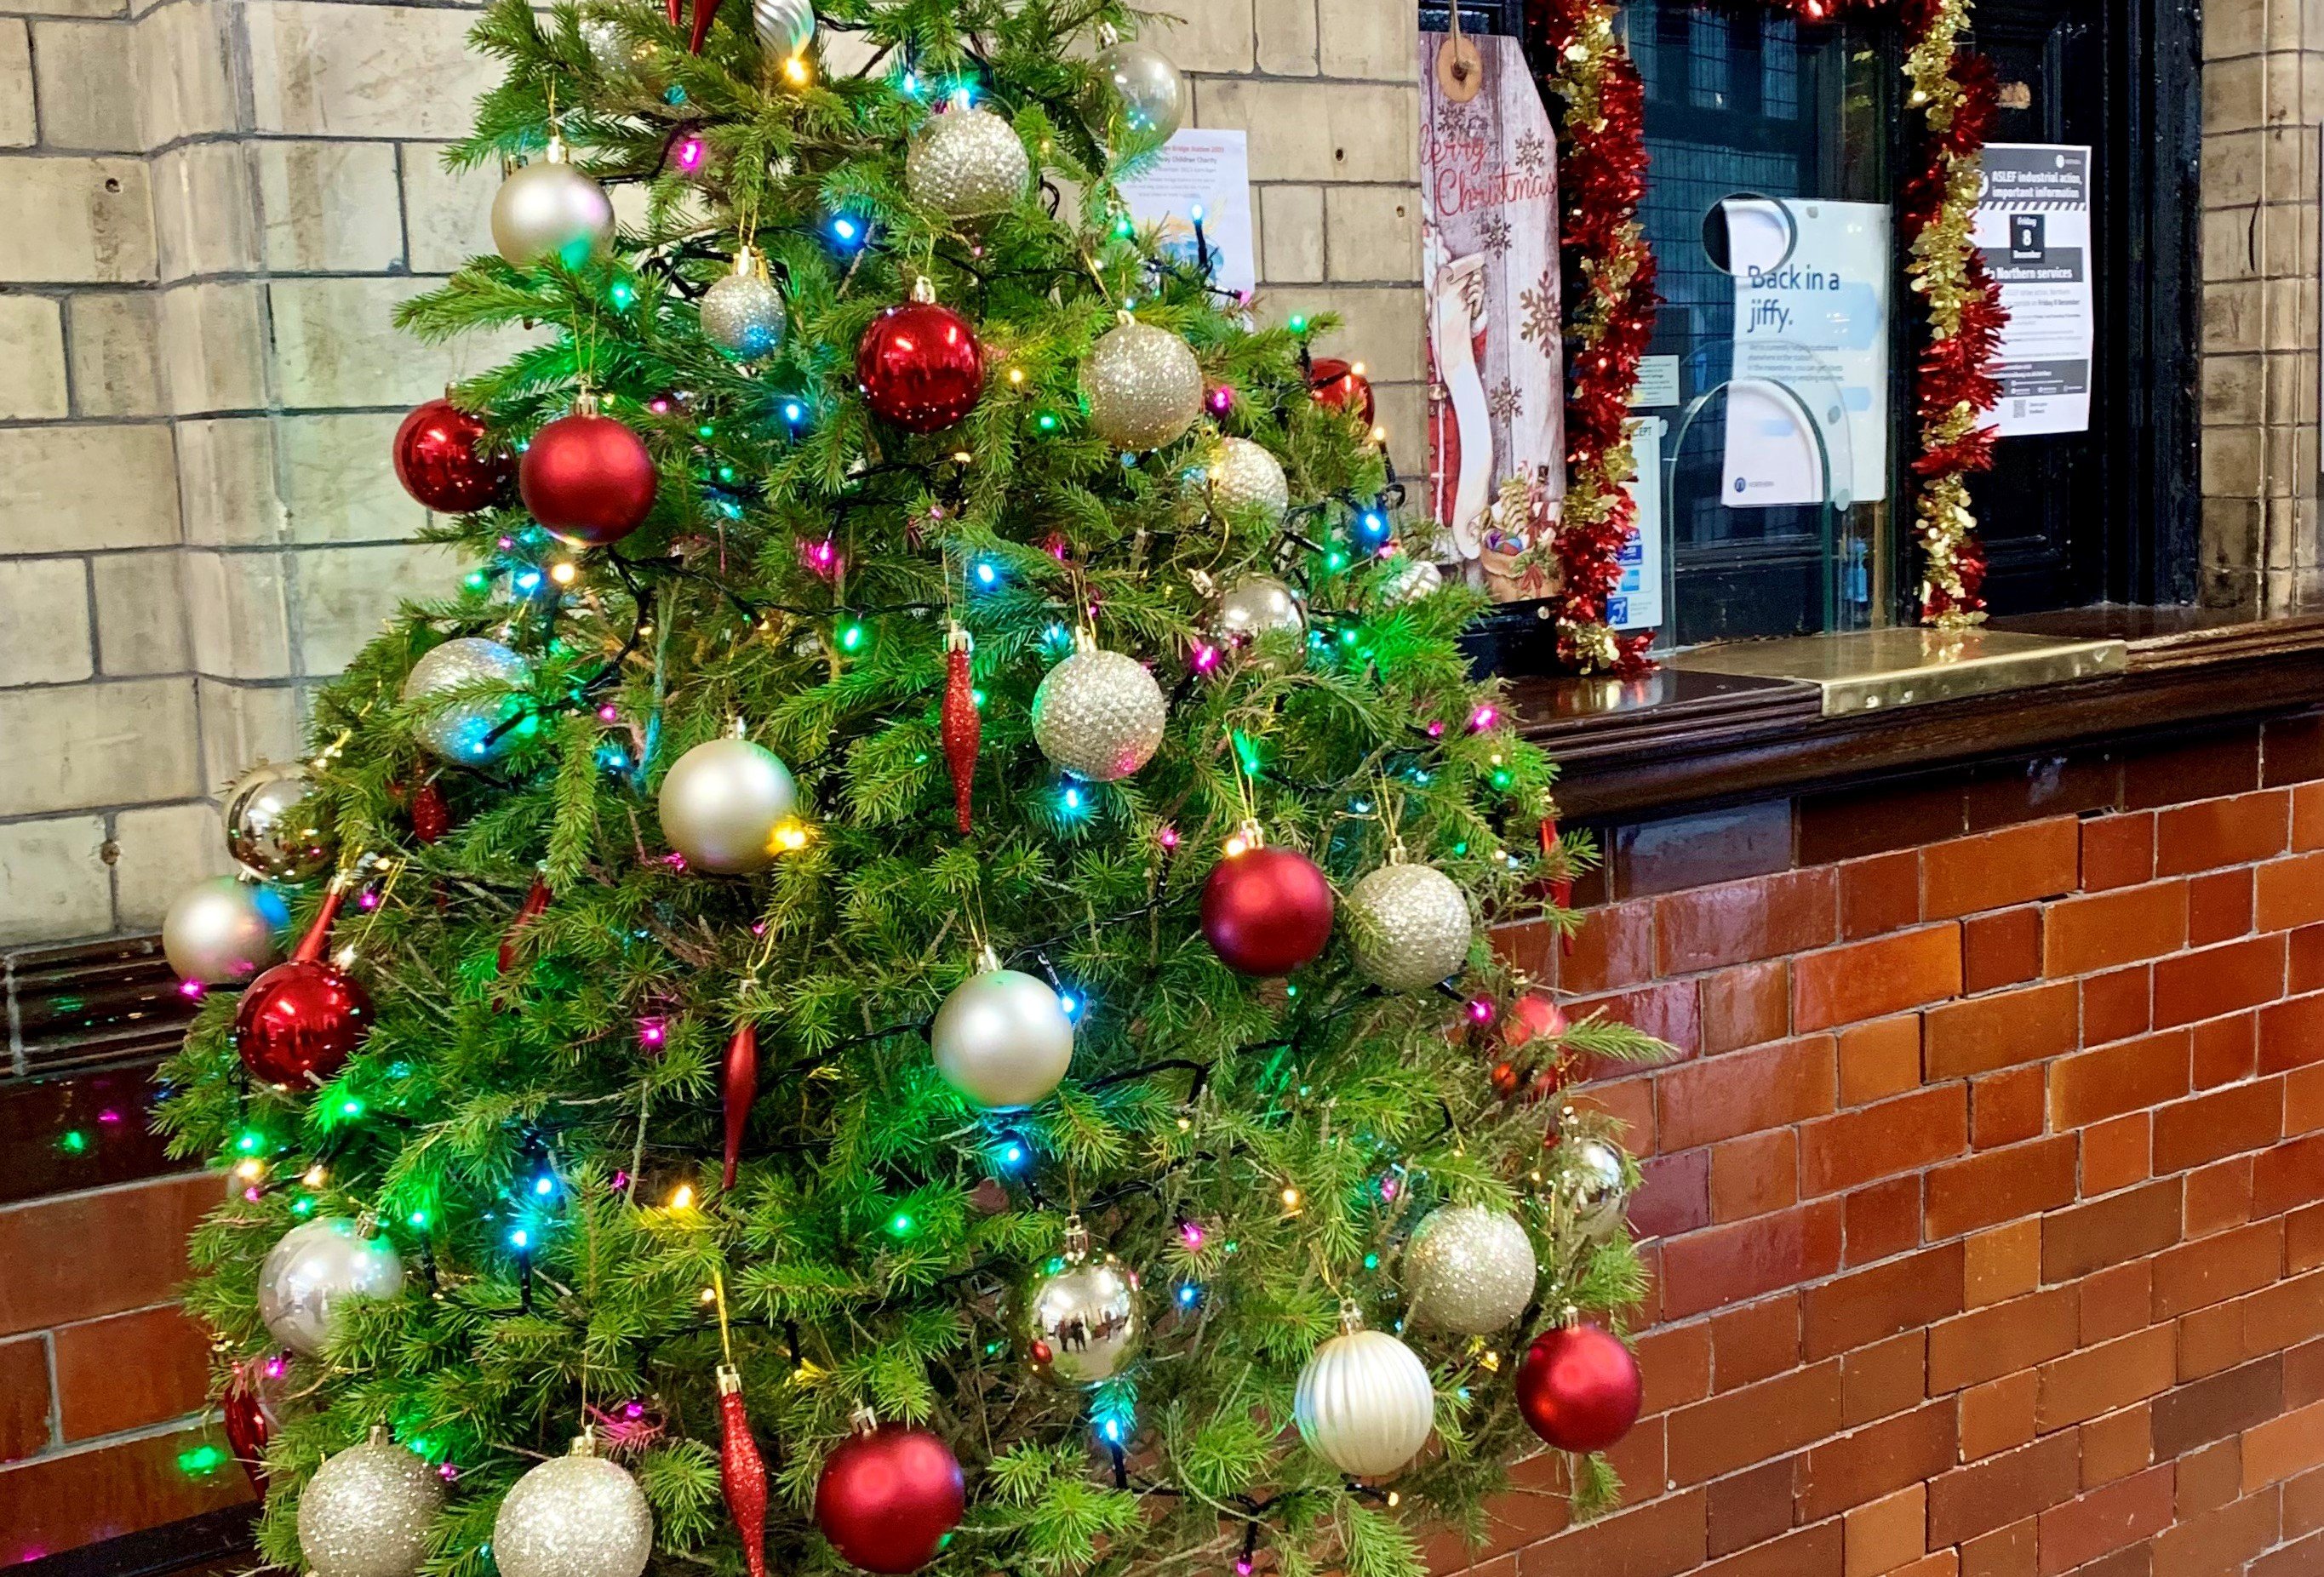 image-shows-one-of-the-rental-christmas-trees-at-hebden-bridge-2